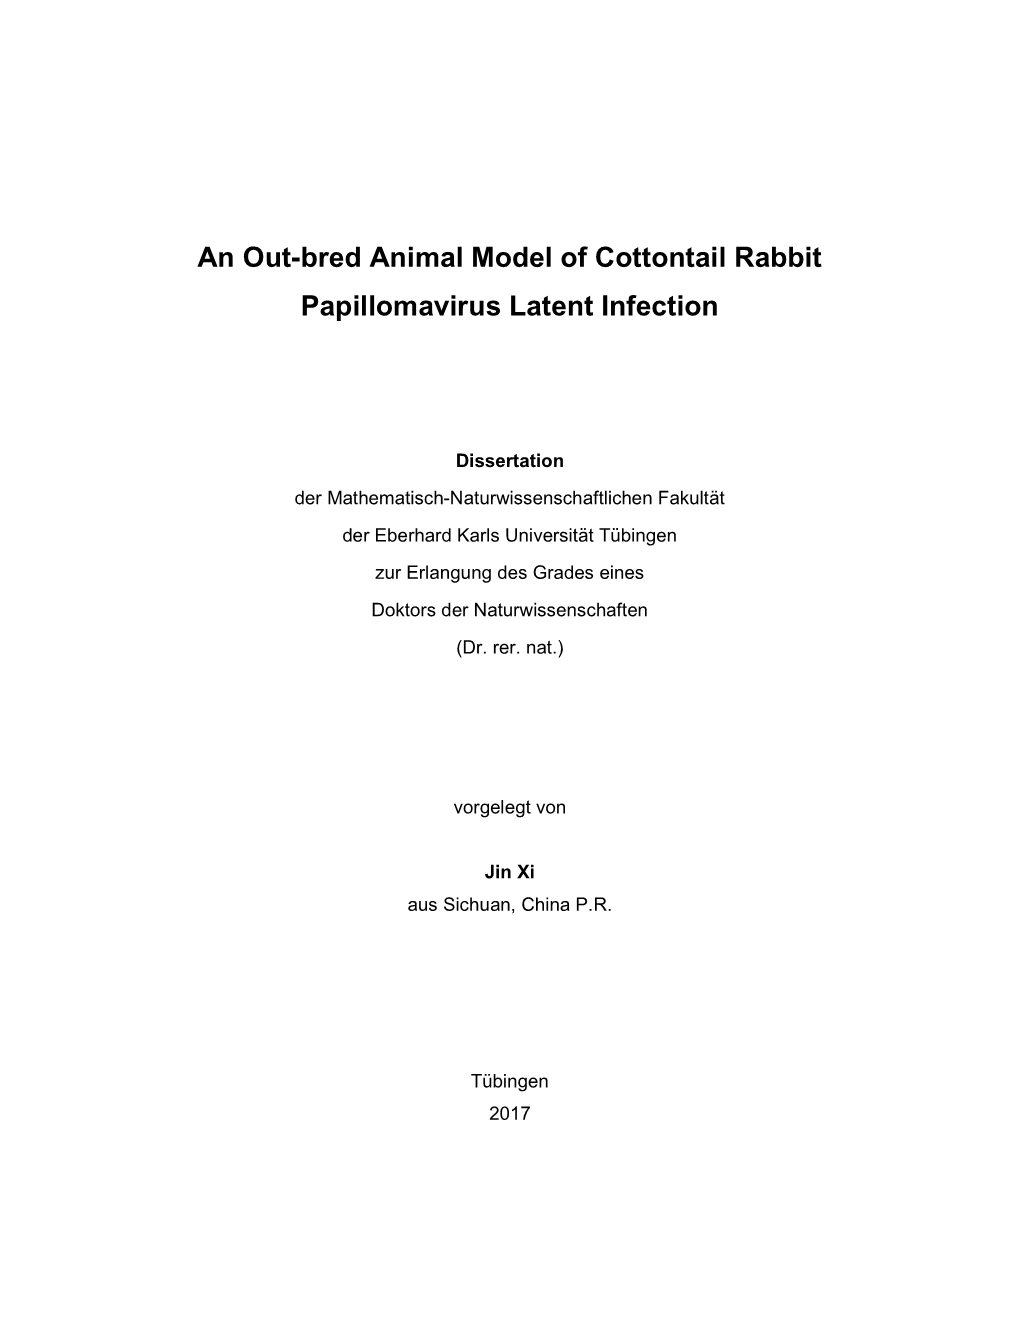 An Out-Bred Animal Model of Cottontail Rabbit Papillomavirus Latent Infection